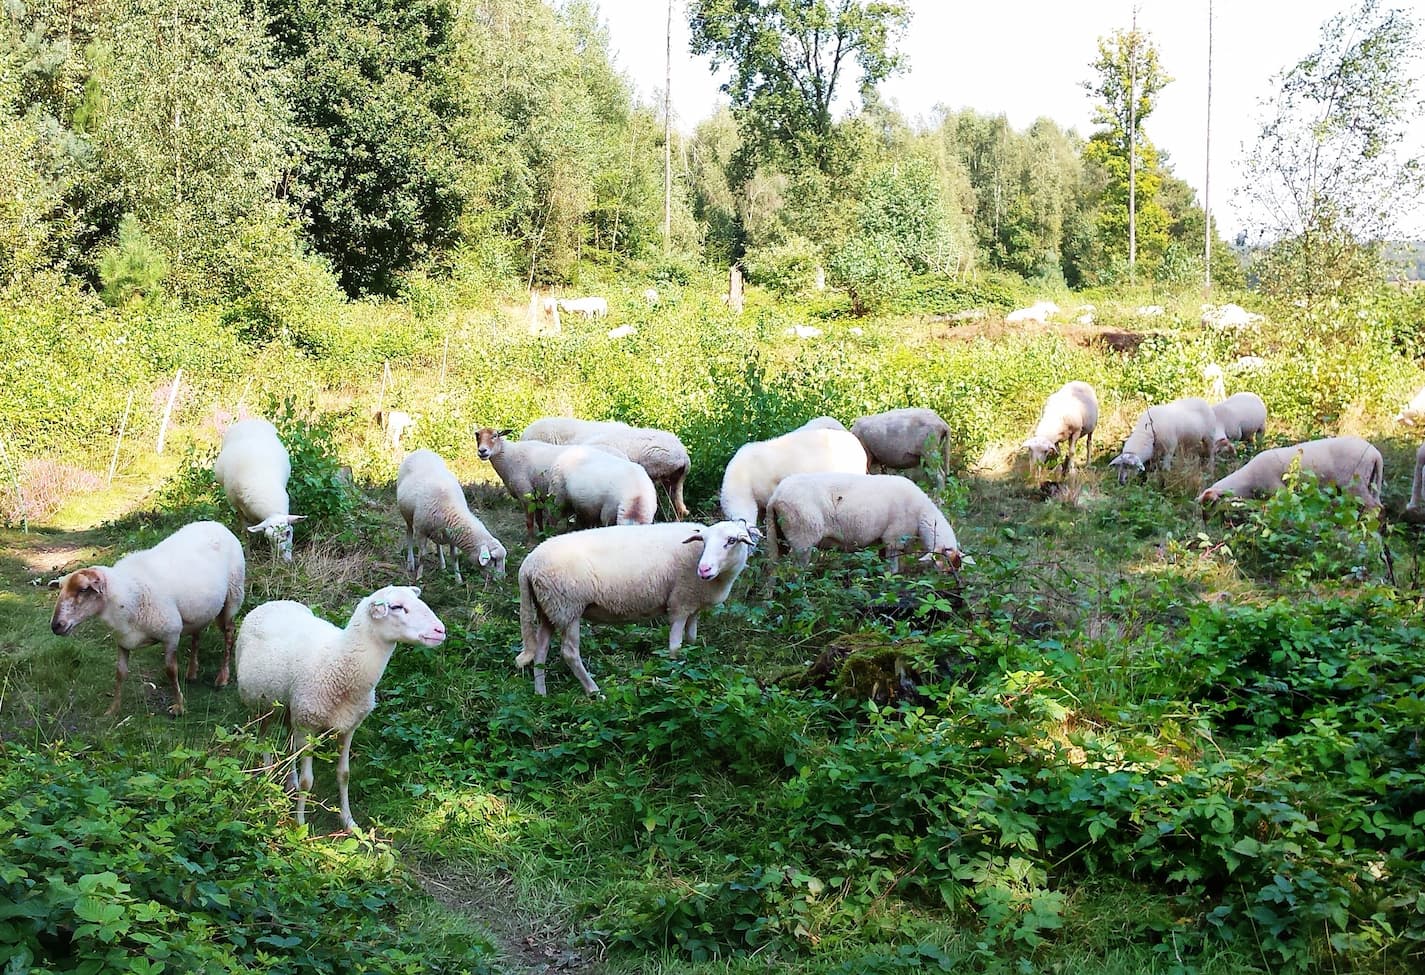 sheep are grazing in the forest 2022 02 15 10 14 33 utc 1